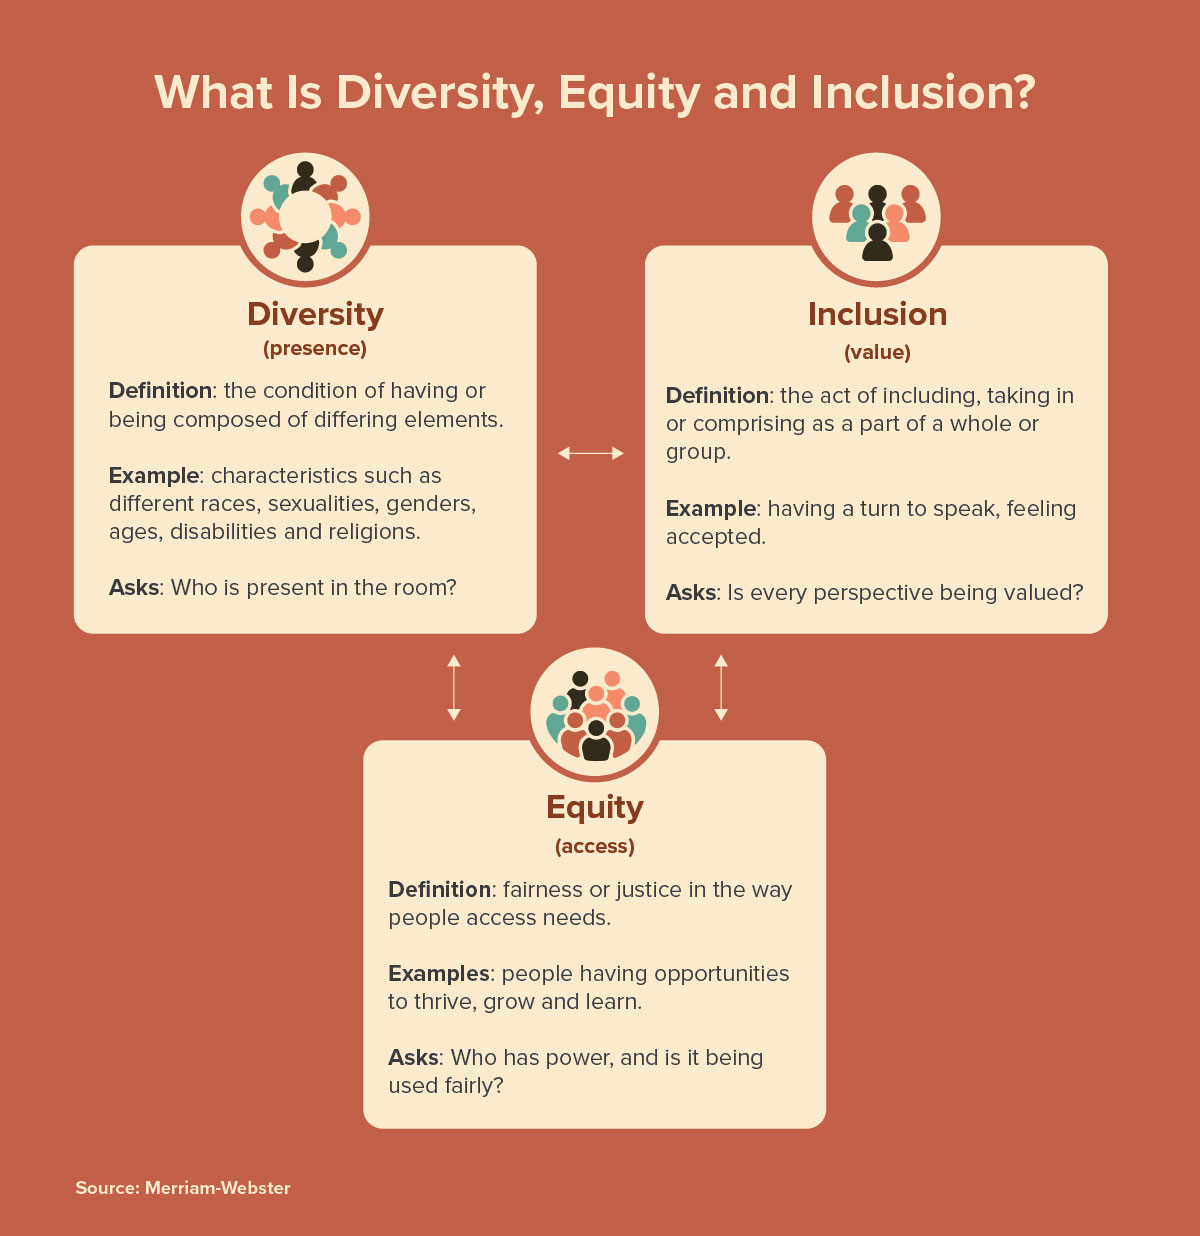 What Is Diversity, Equity and Inclusion? Three terms that work together to ensure people feel value